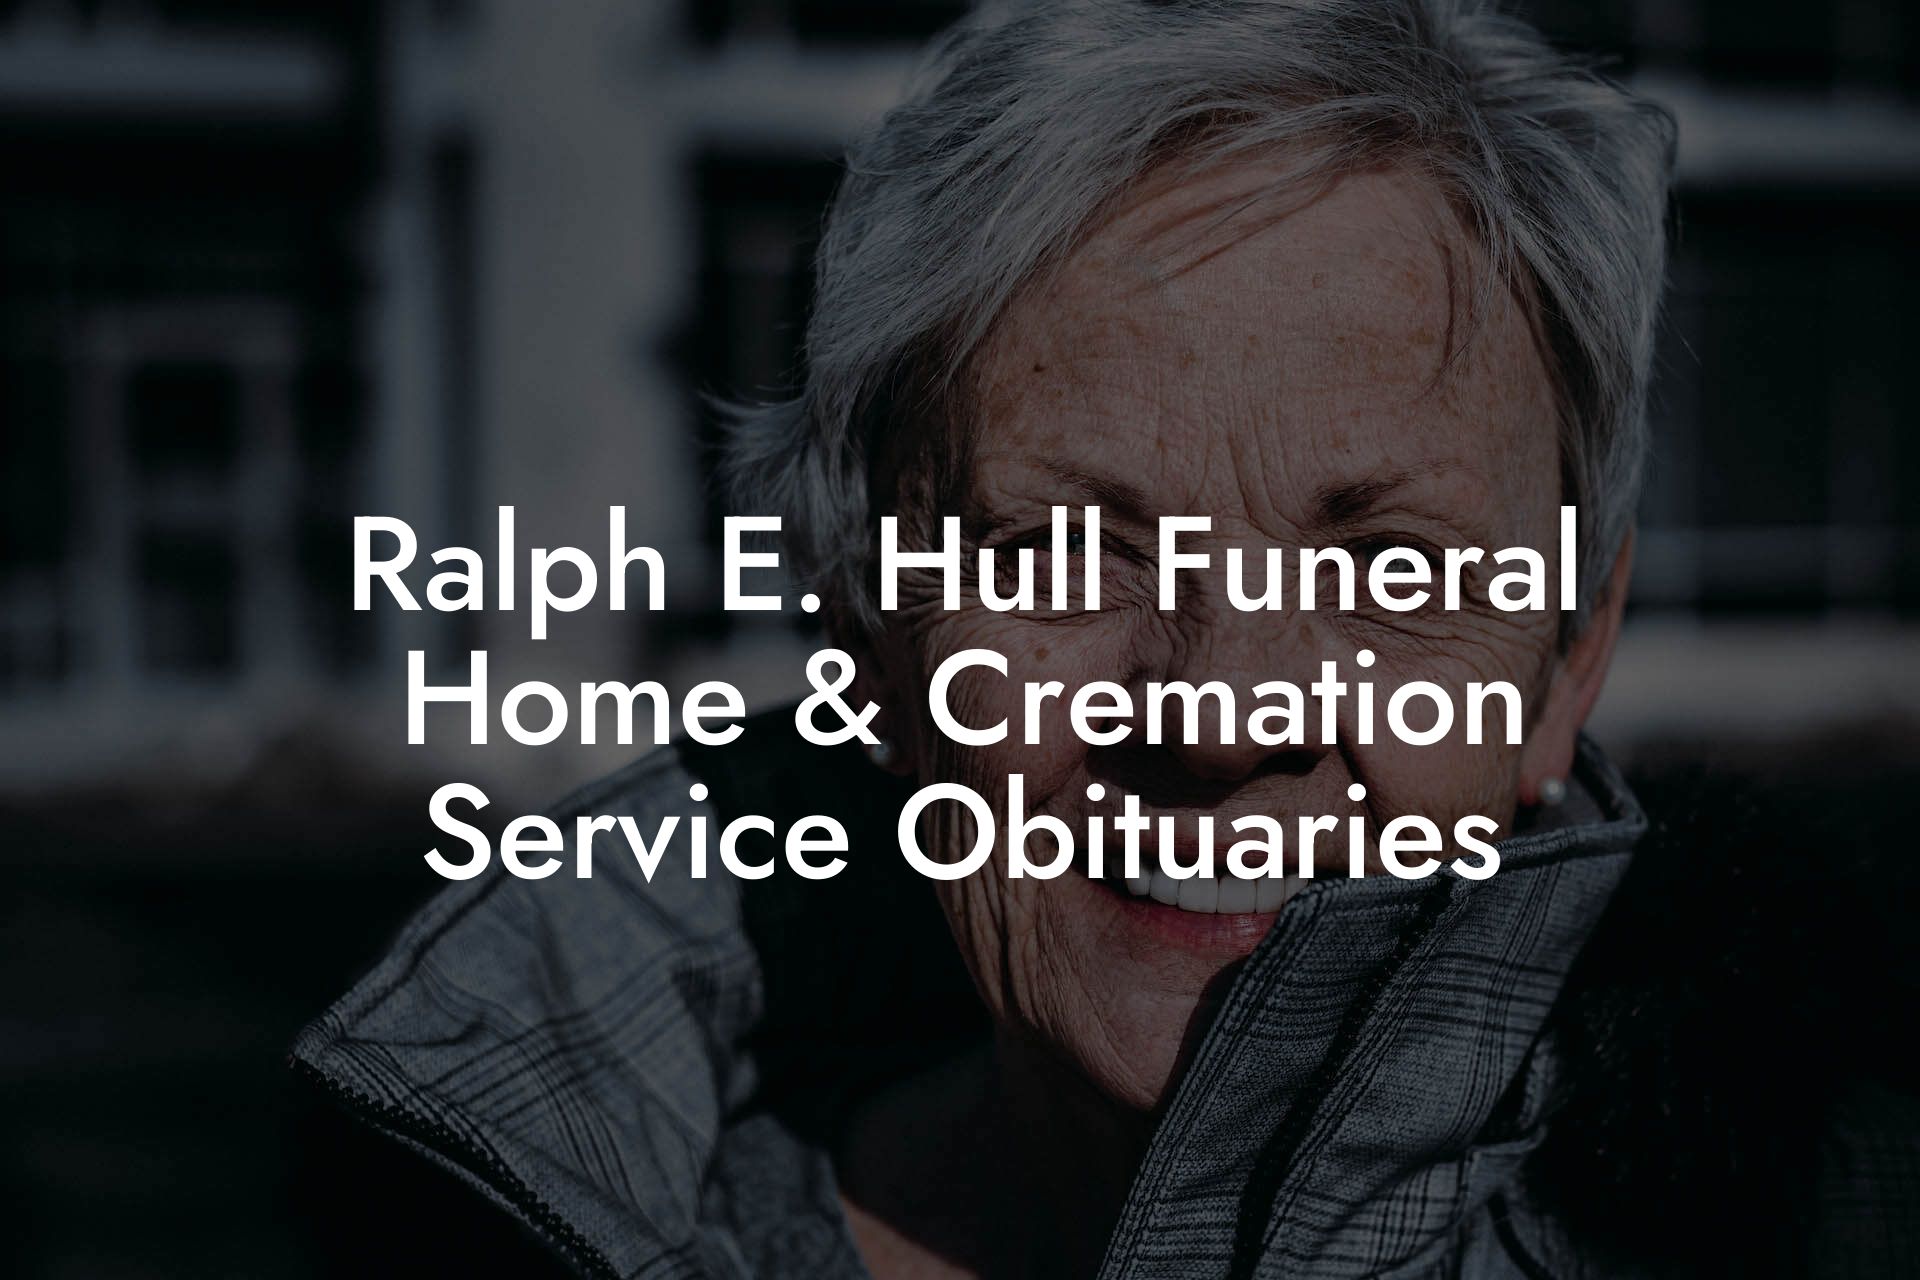 Ralph E. Hull Funeral Home & Cremation Service Obituaries